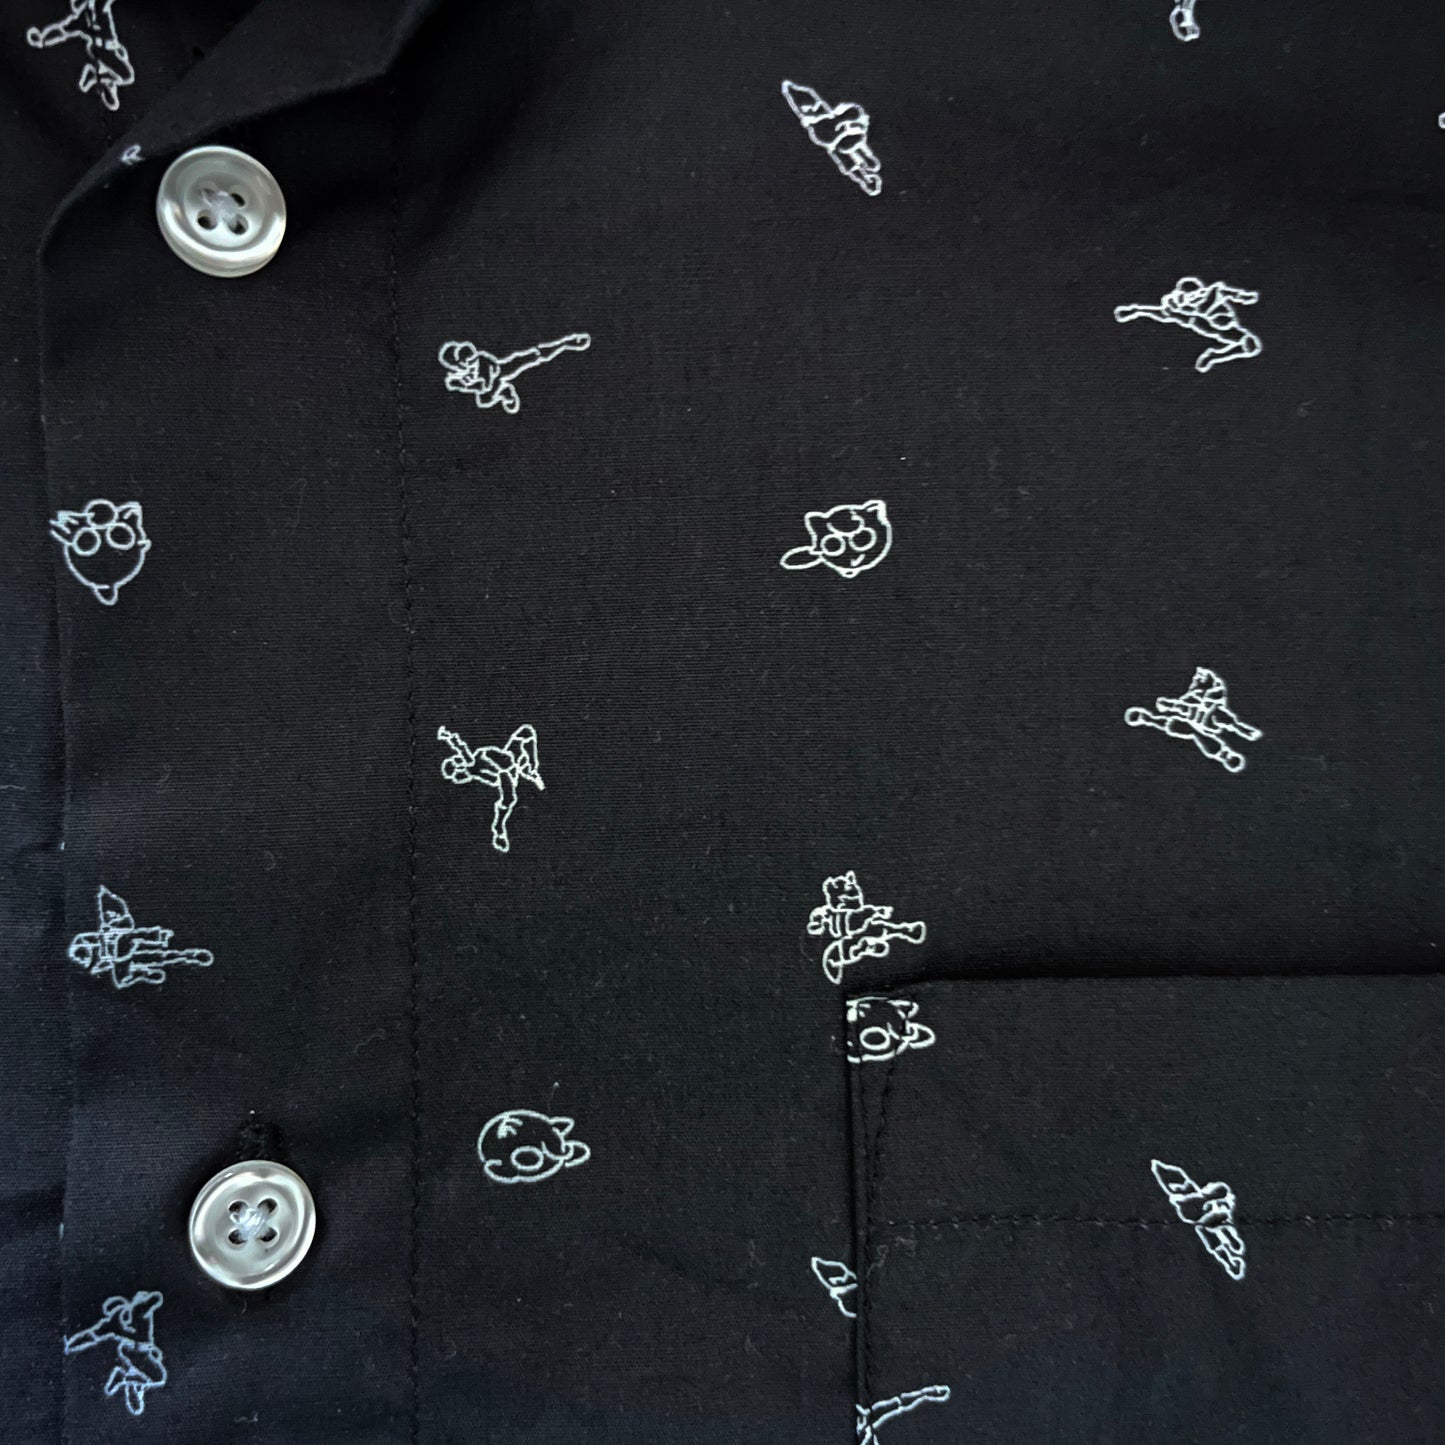 Melee Button Down